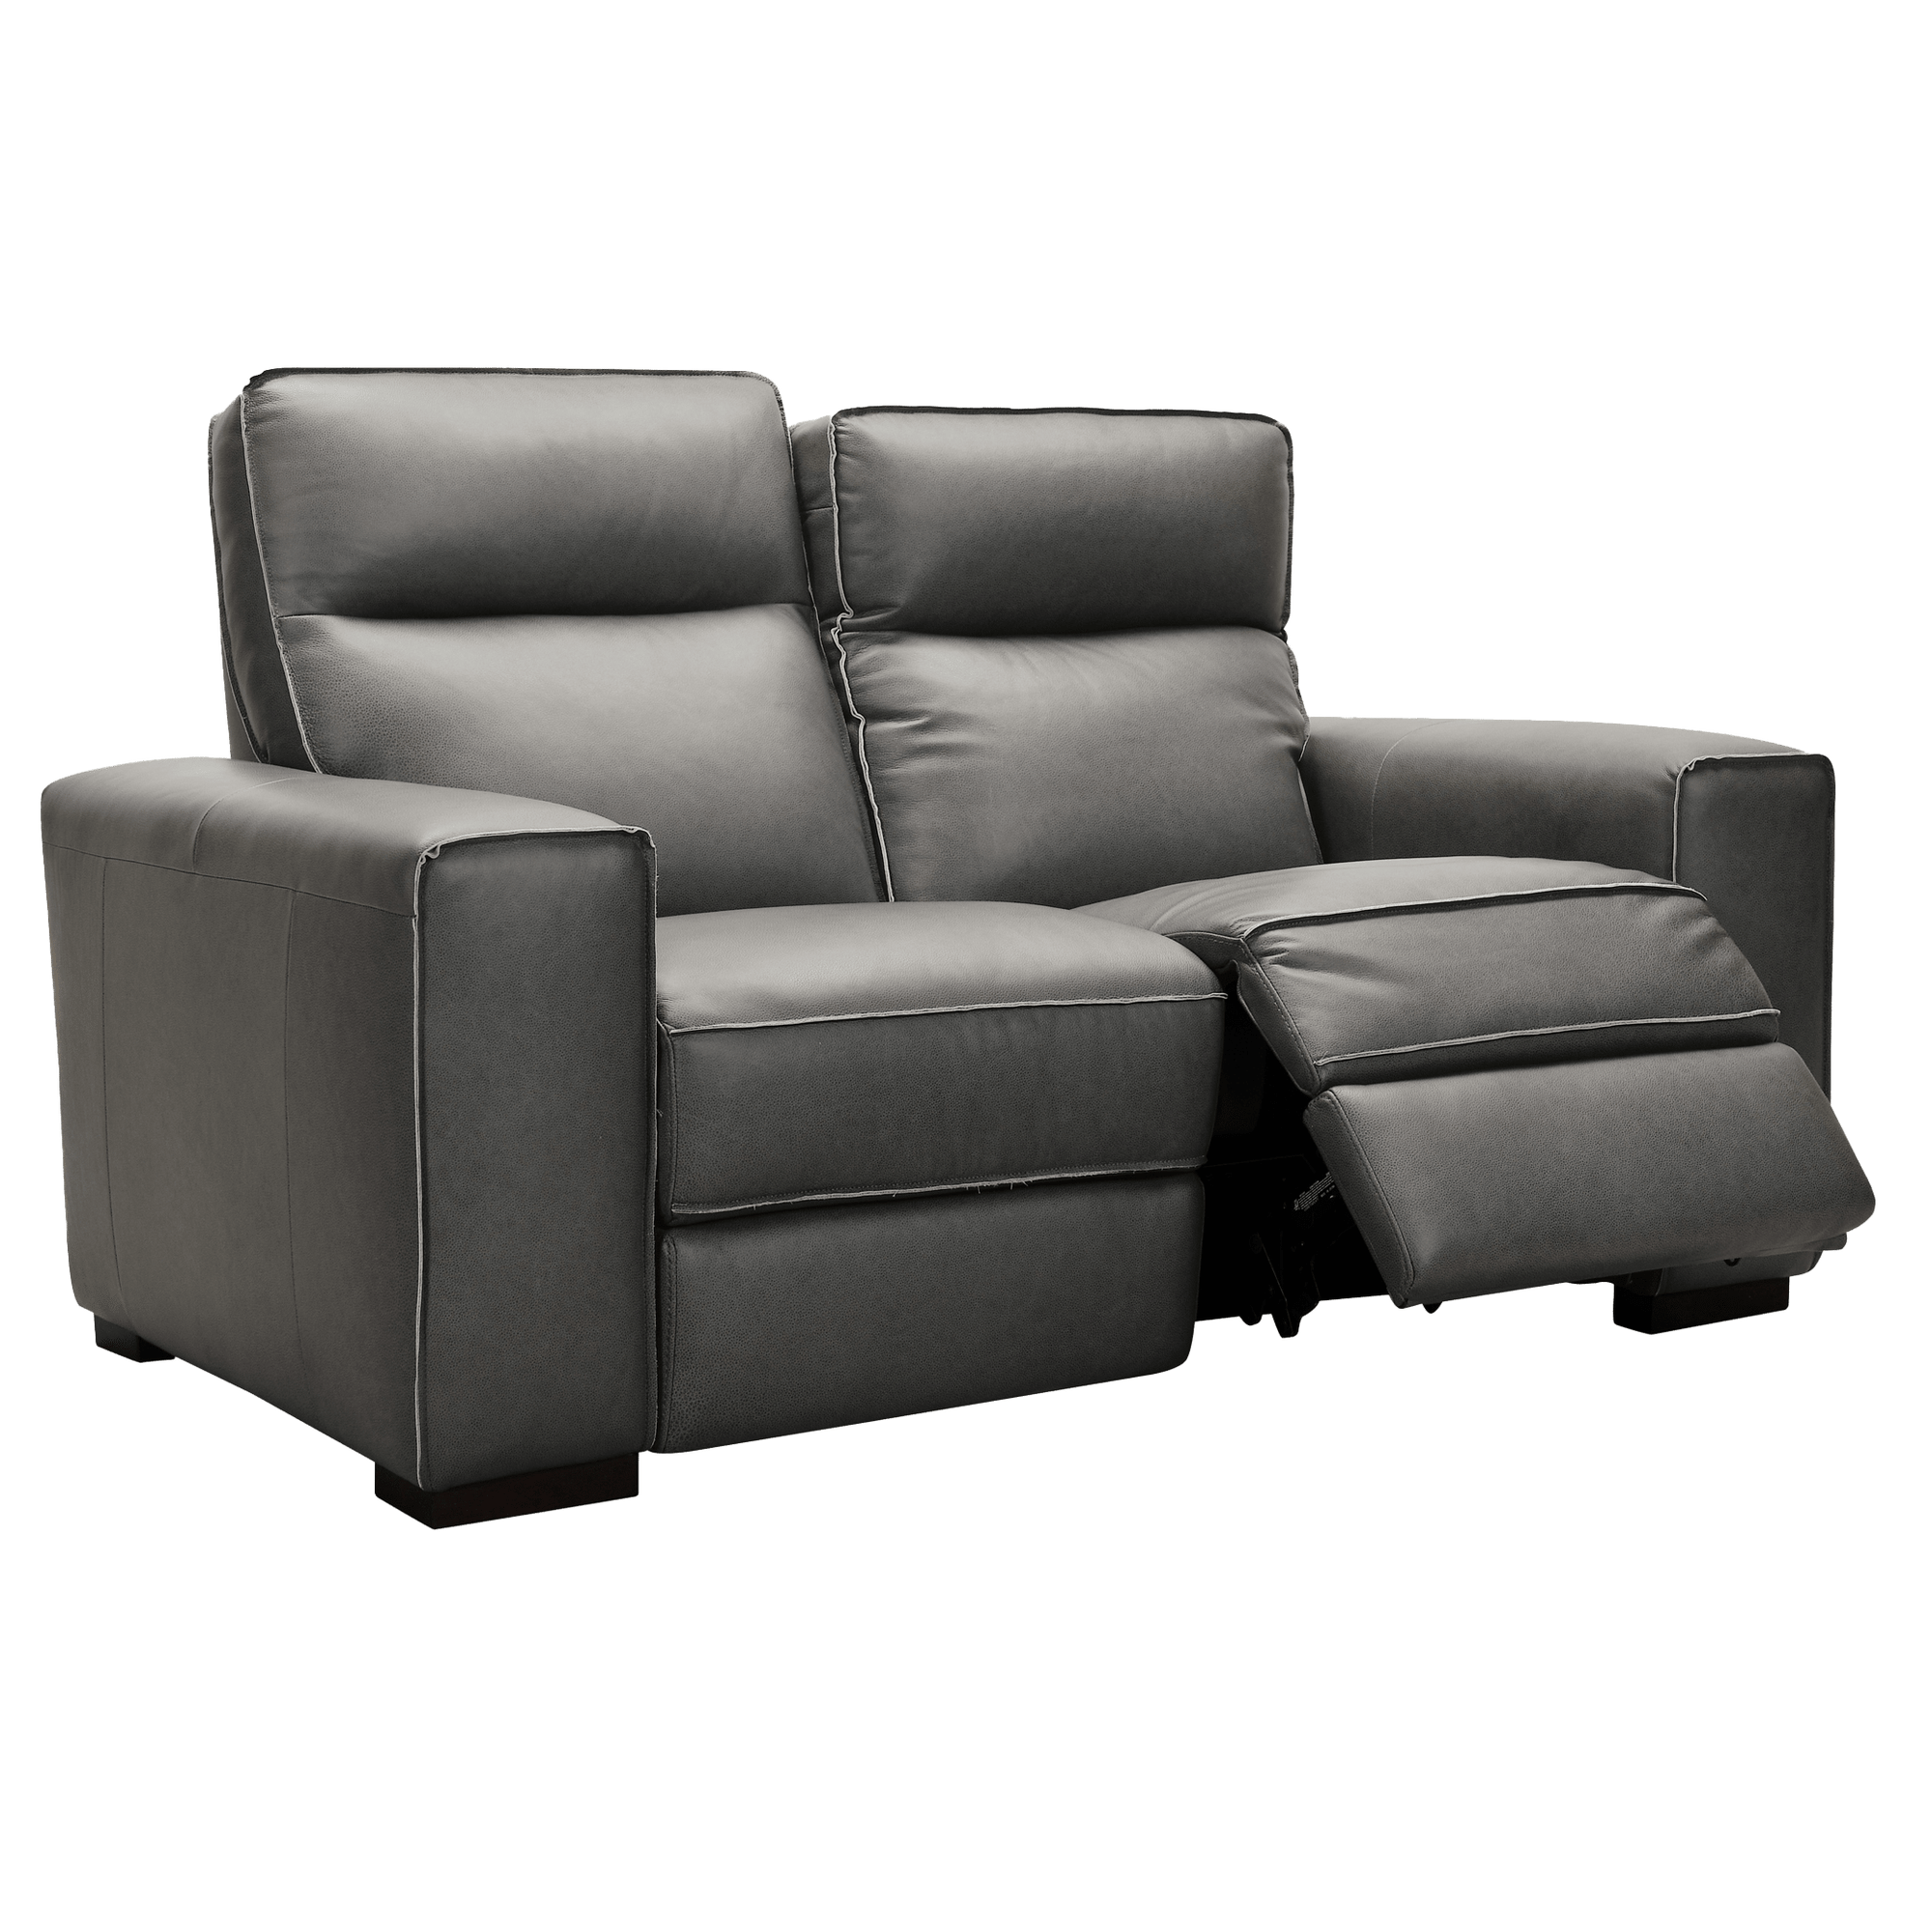 Baxlee 65" Wide Upholstered Leather Loveseat, Gray - Coja